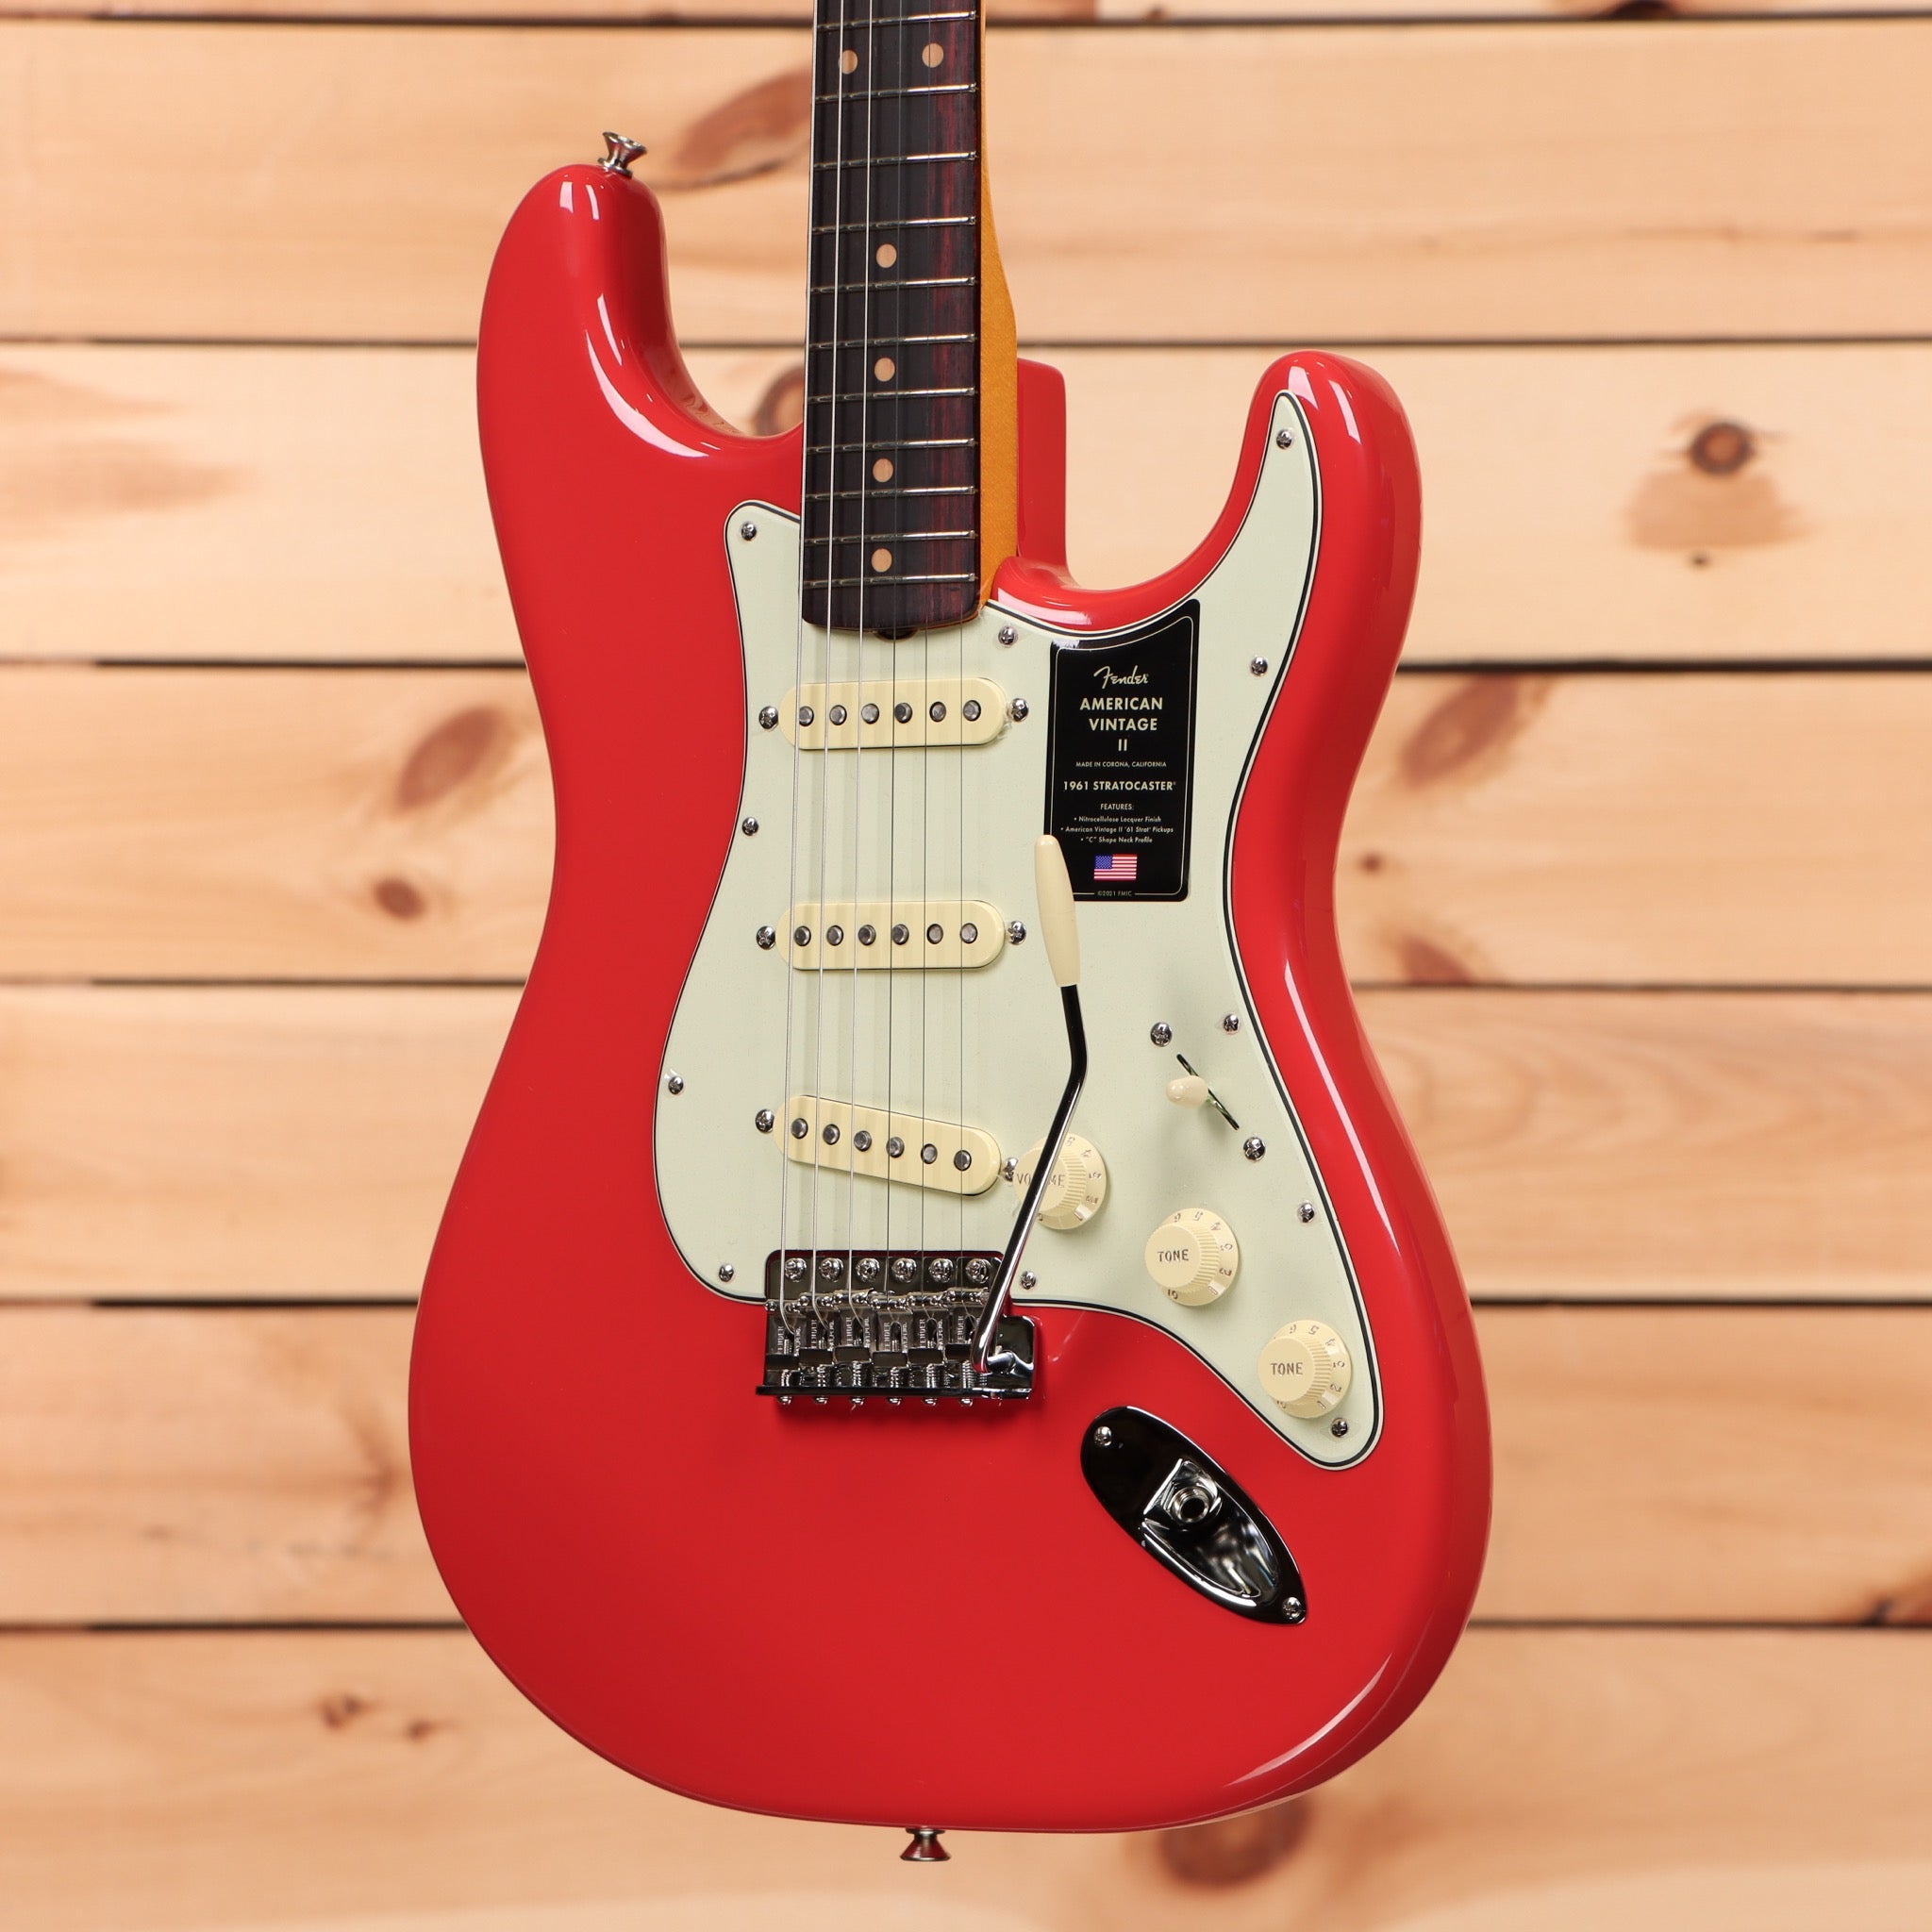 Fender American Vintage II Stratocaster - Fiesta Red – Righteous Guitars